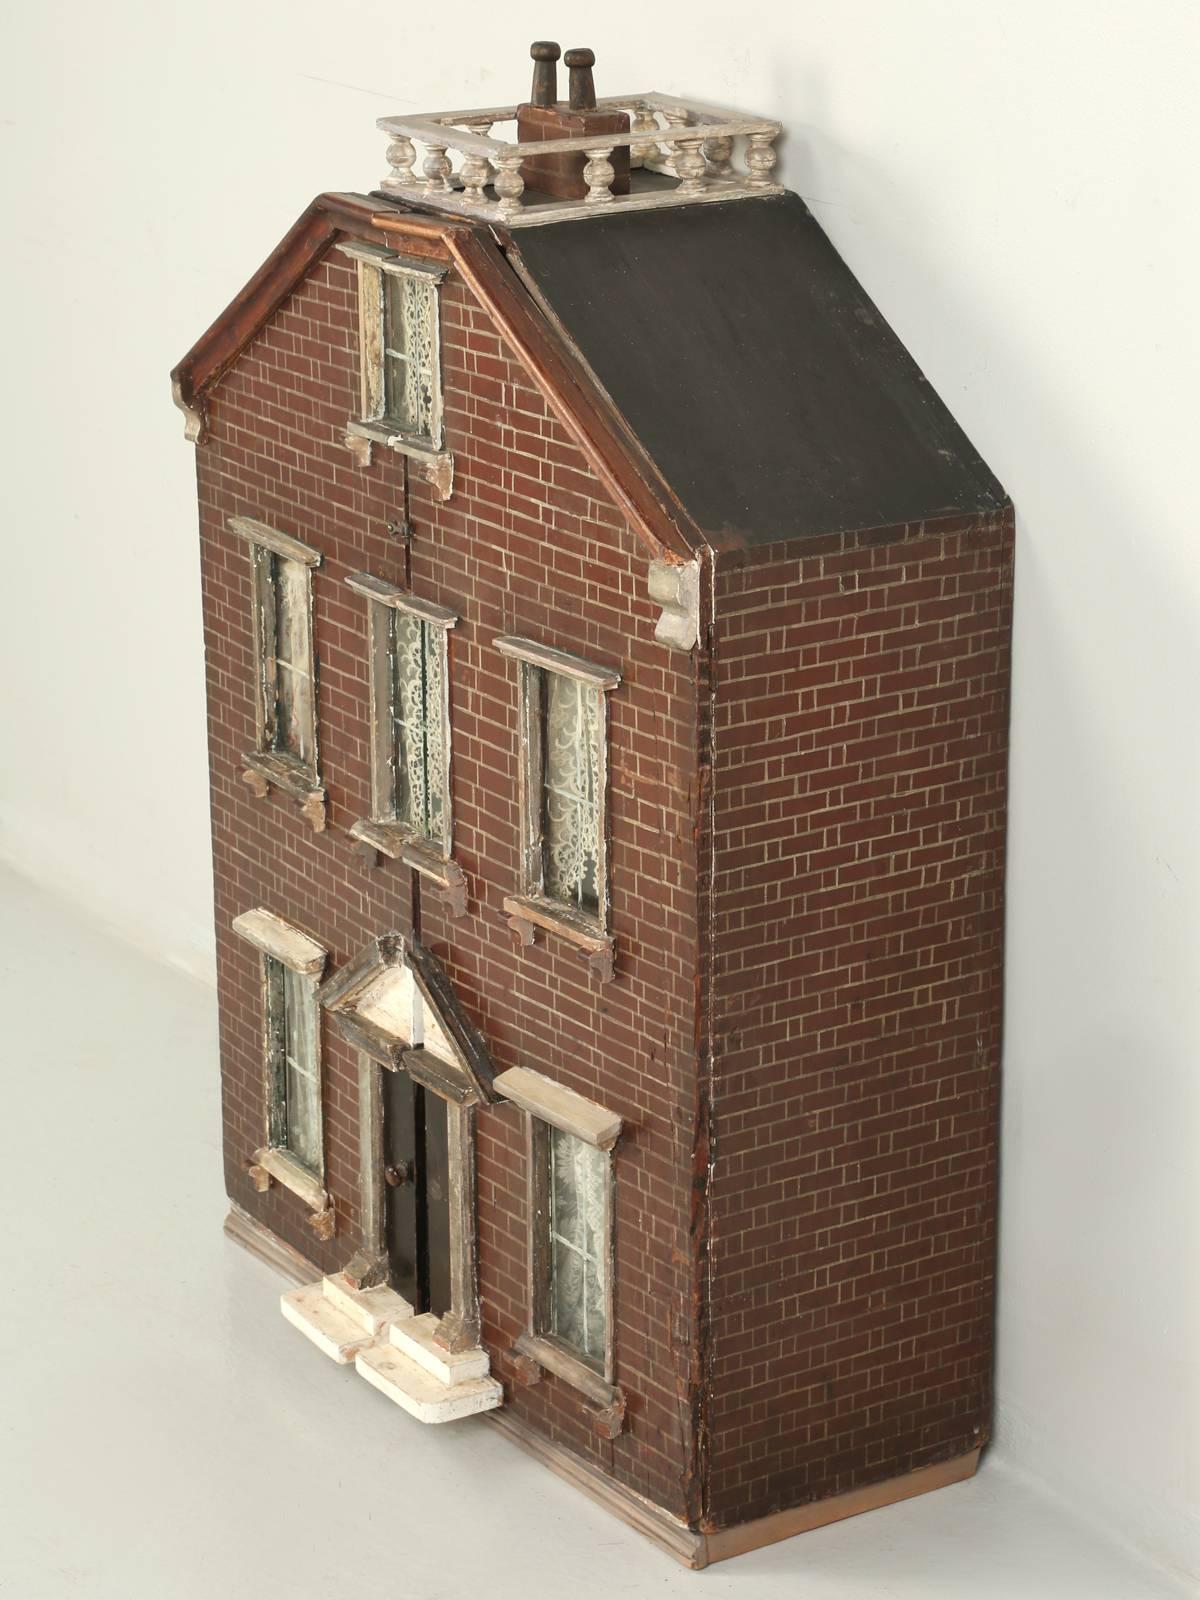 Victorian antique English dollhouse found in the town of Leek, England. One of our favorite English antique dealers came up with this very original English dollhouse, still with its original curtains. This antique dollhouse, just came out of a